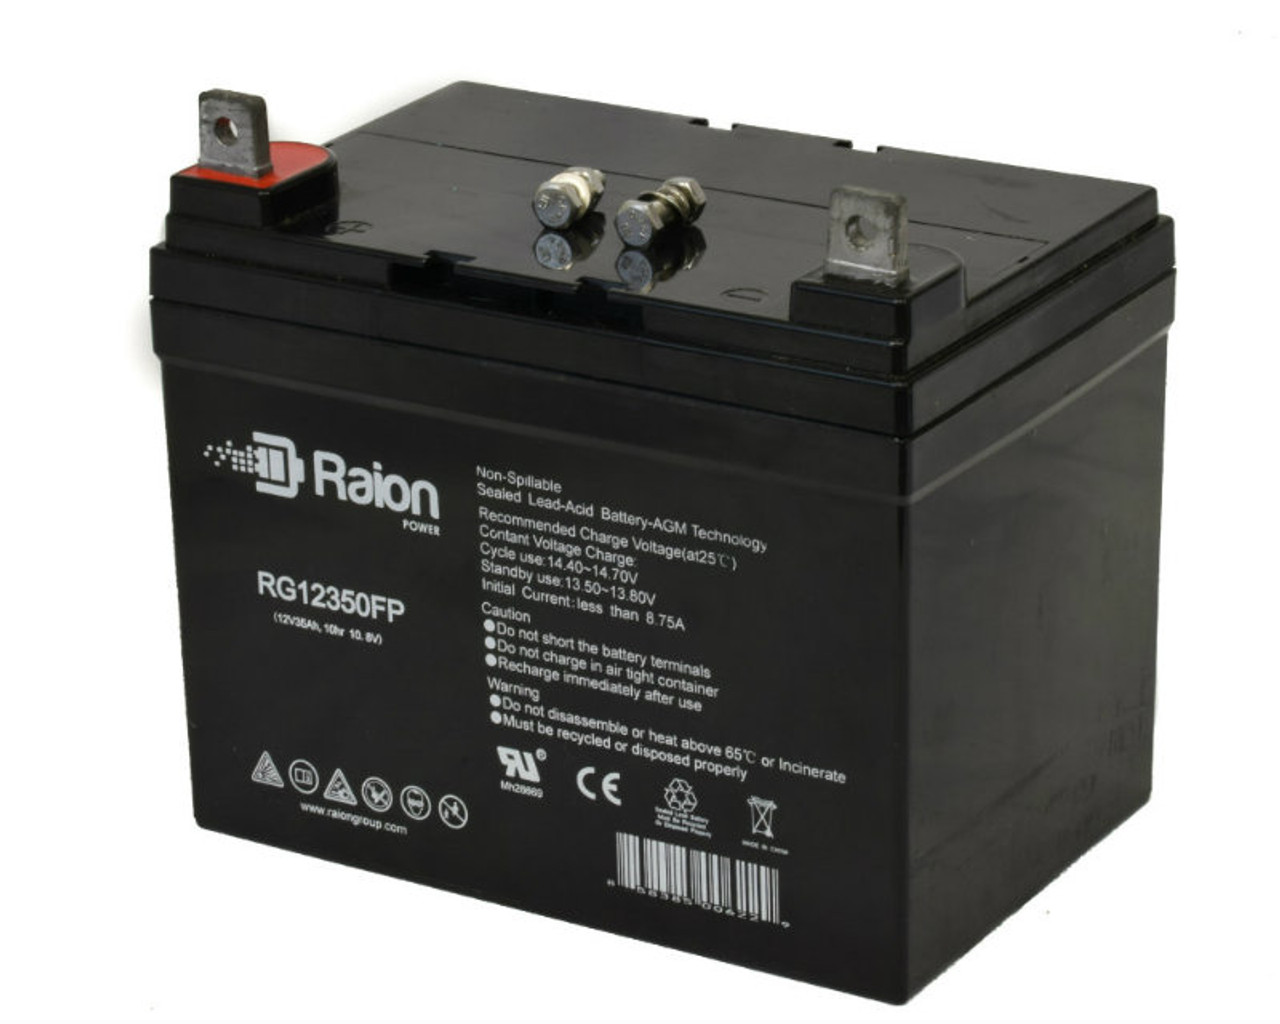 Raion Power Replacement 12V 35Ah Battery for Murray S1642 - 1 Pack